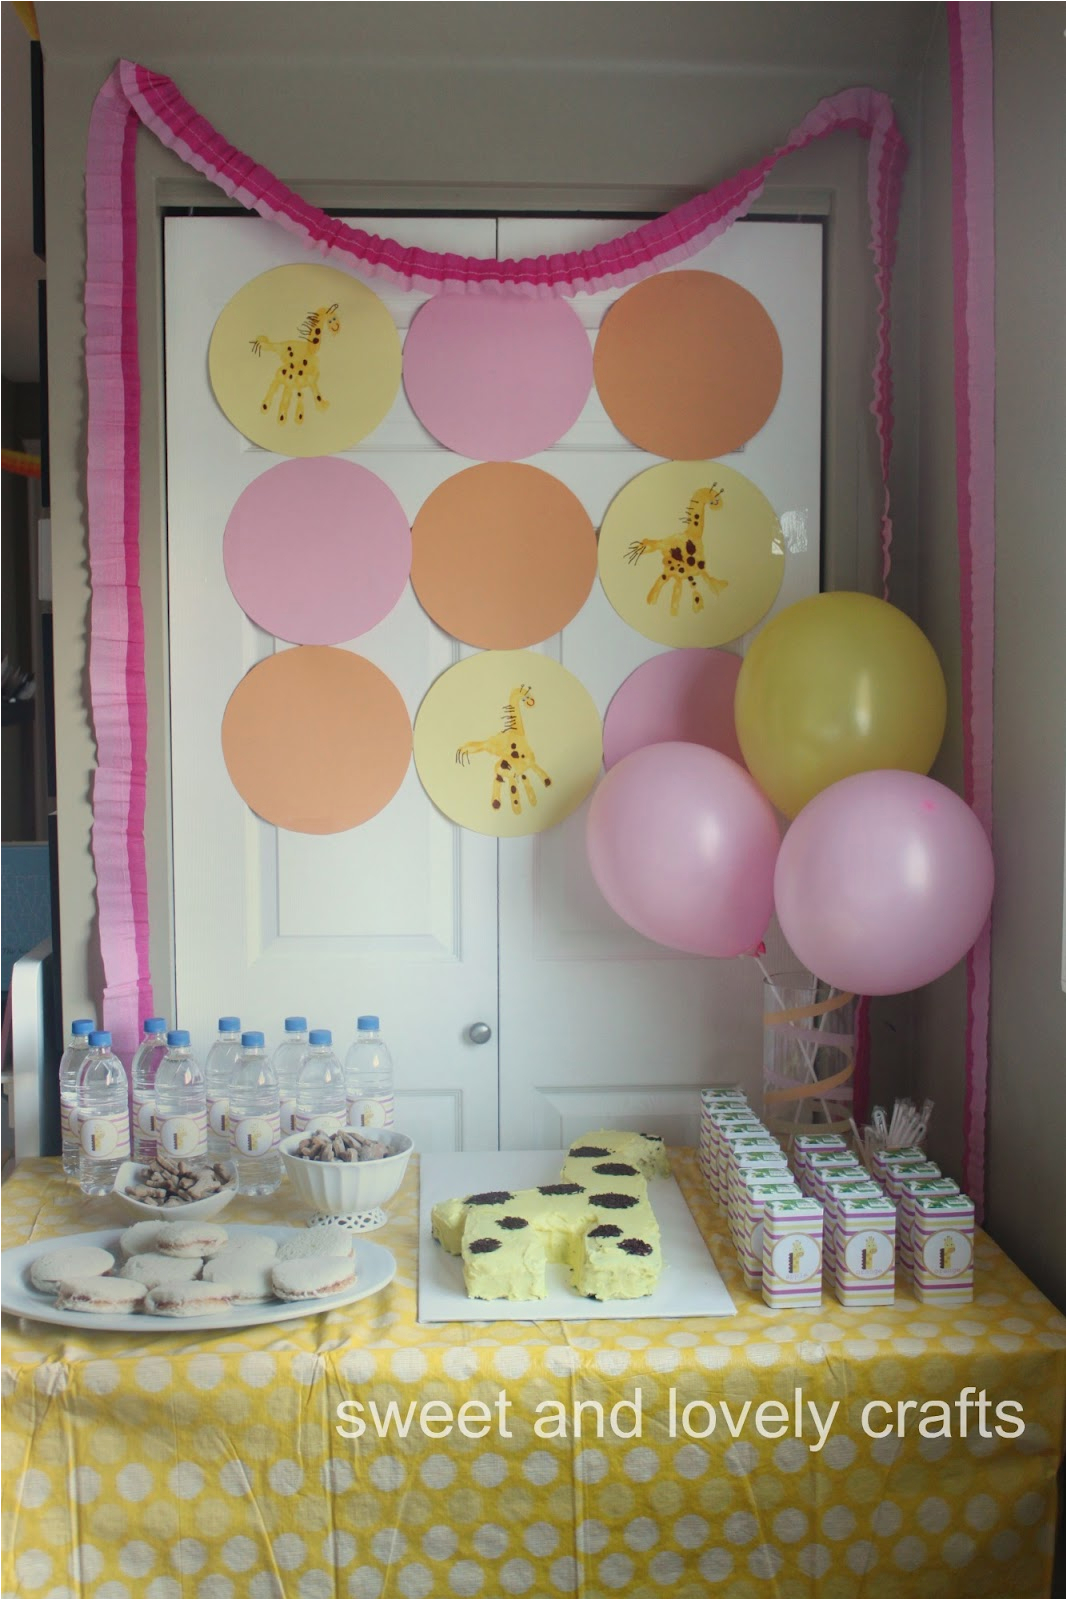 claires giraffe party